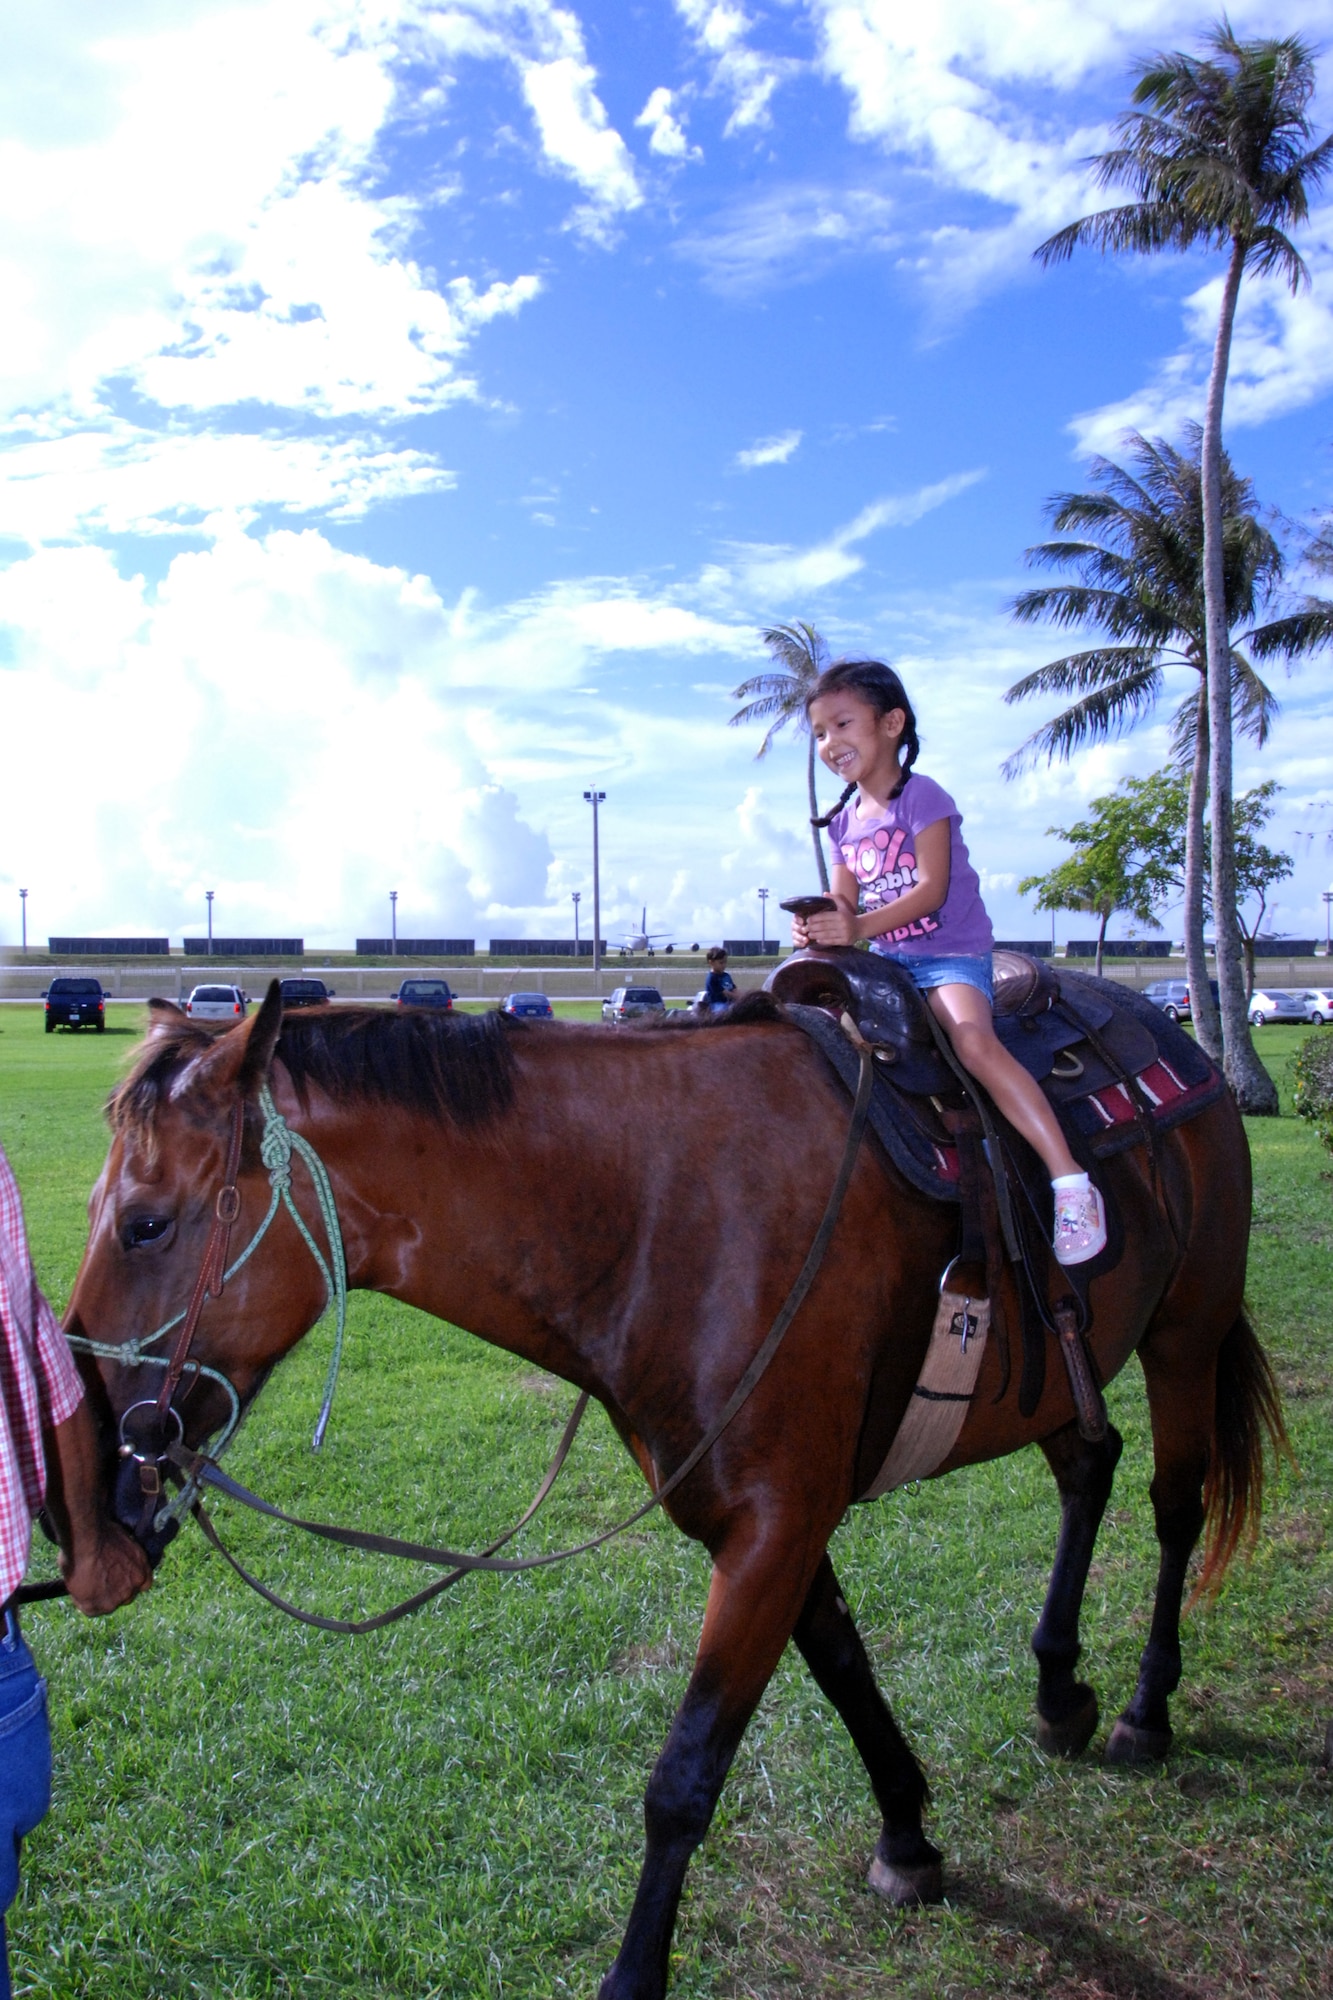 ANDERSEN AIR FORCE BASE, Guam - Servicemembers and their families came out to celebrate Independence Day at Arc Light Memorial Park July 2. The annual Freedom Fest featured games, bouncy castles and horseback riding. (U.S. Air Force photo by Airman Whitney Amstutz)